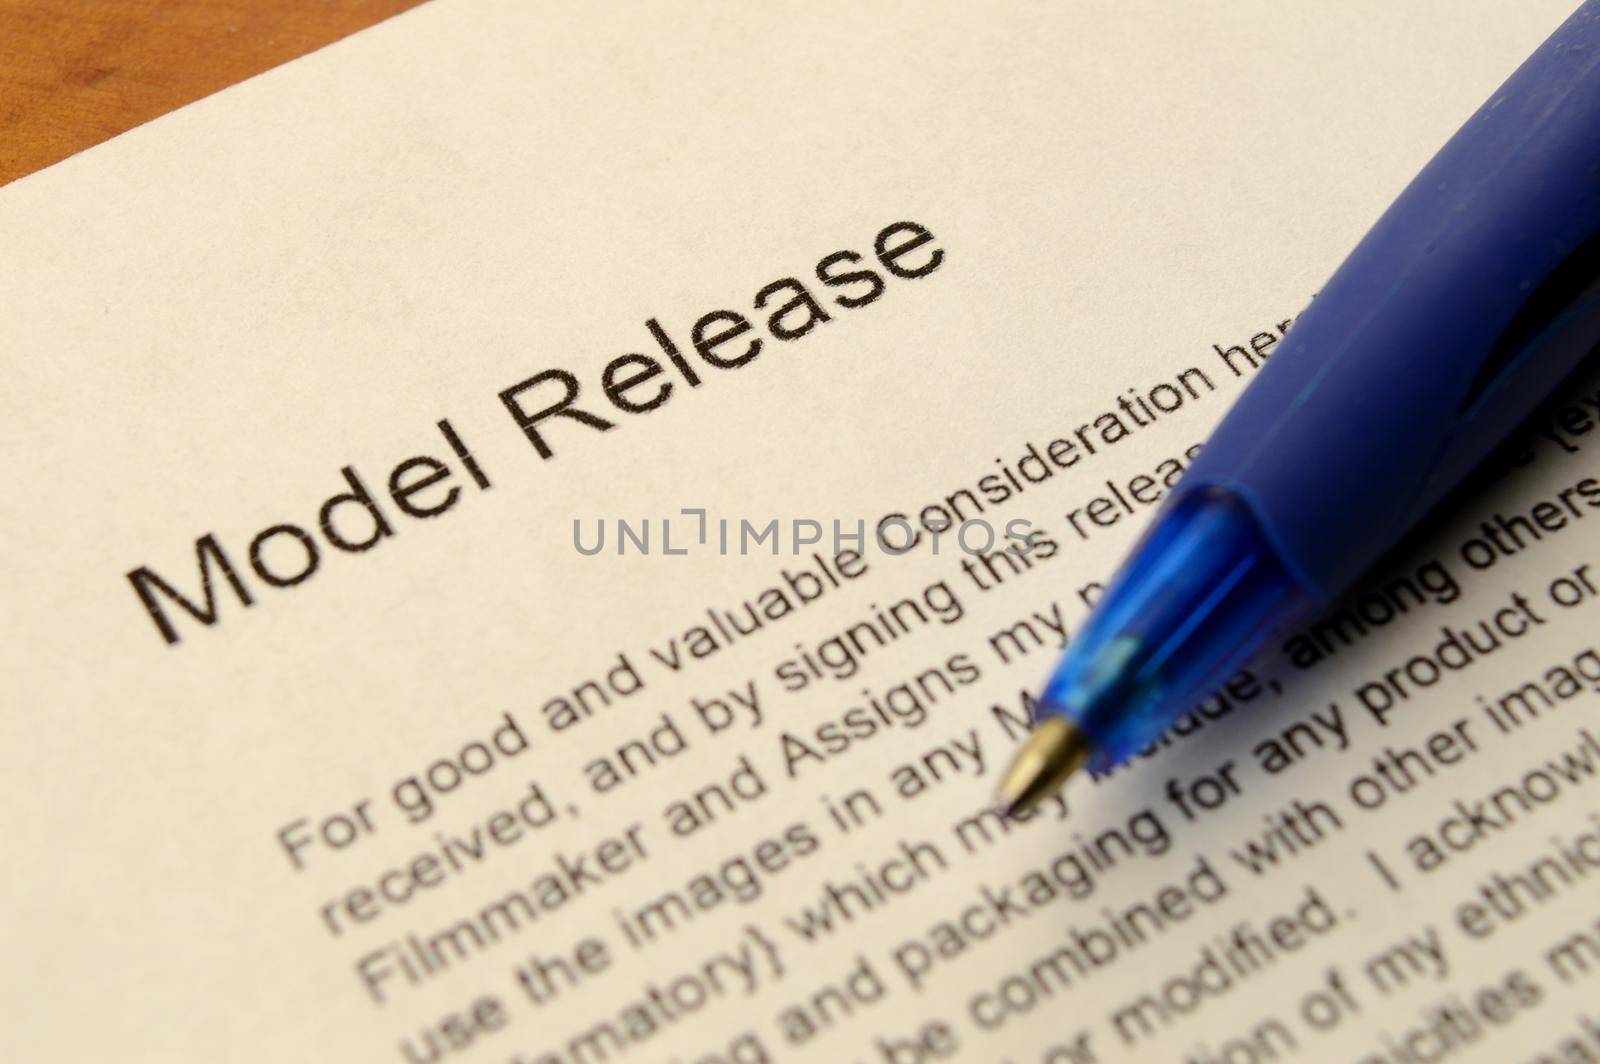 Model Release Form by AlphaBaby